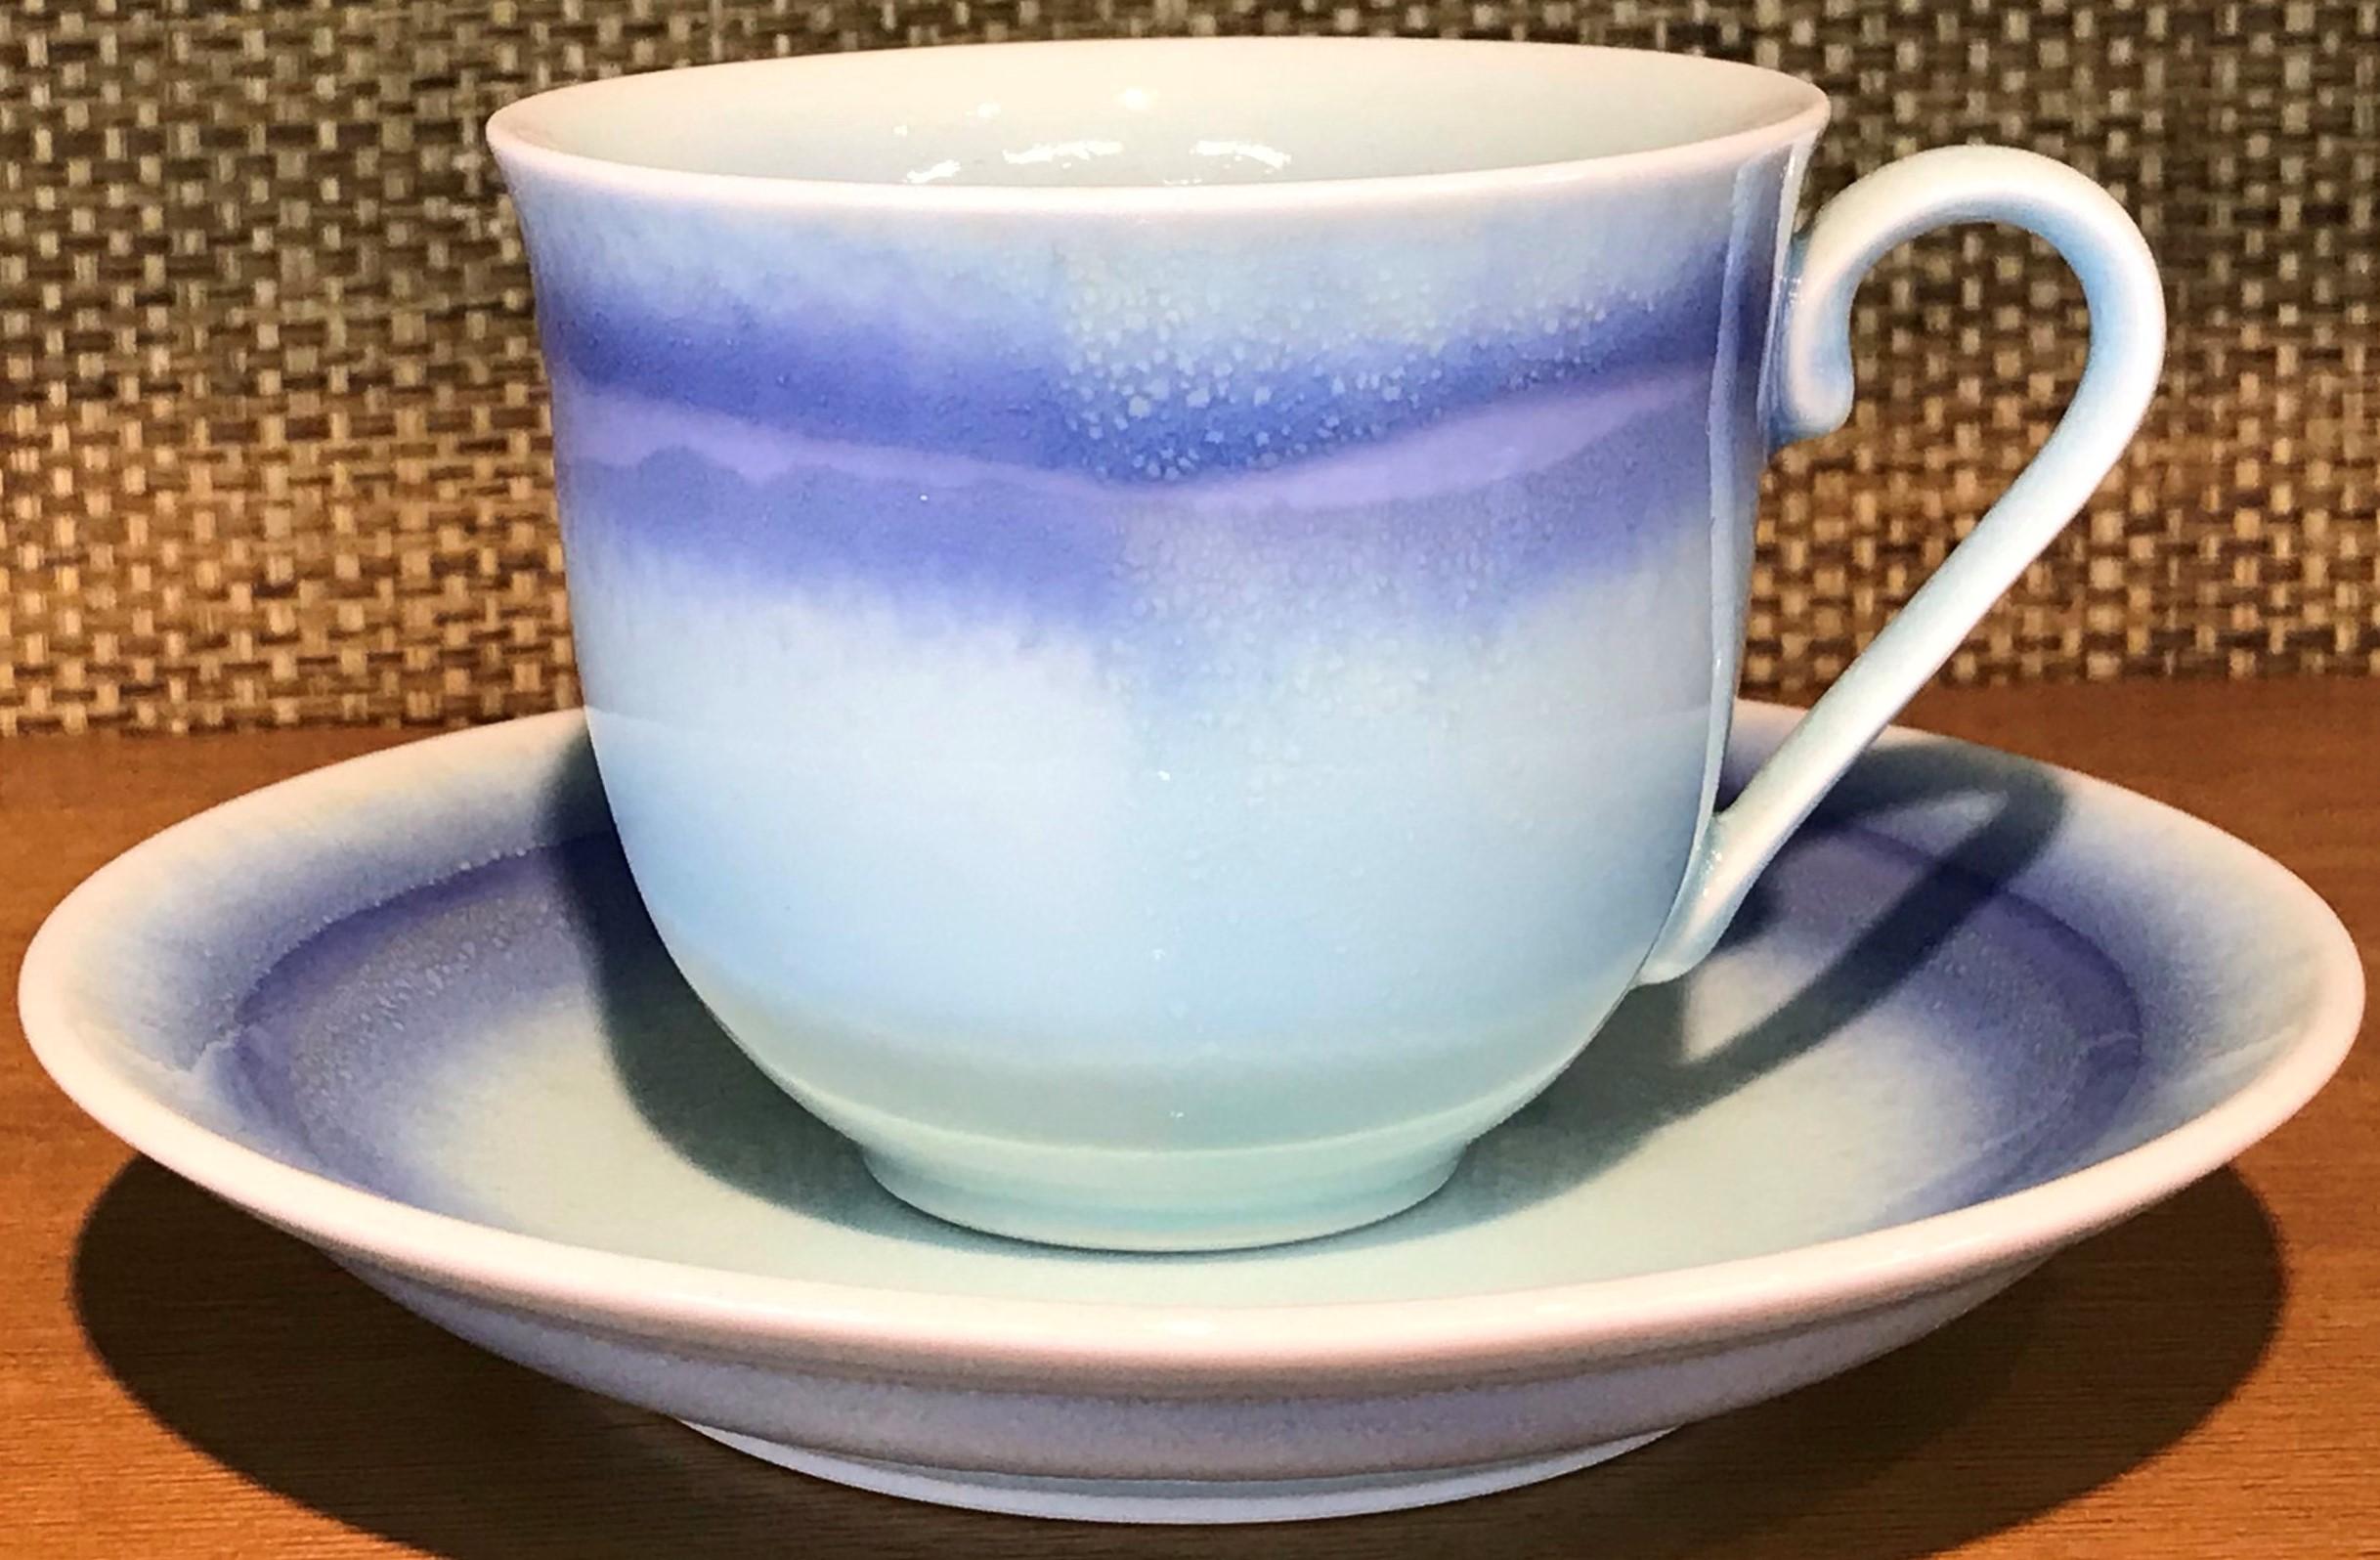 Contemporary Japanese Red White Hand-Glazed Porcelain Cup and Saucer by Master Artist, 2018